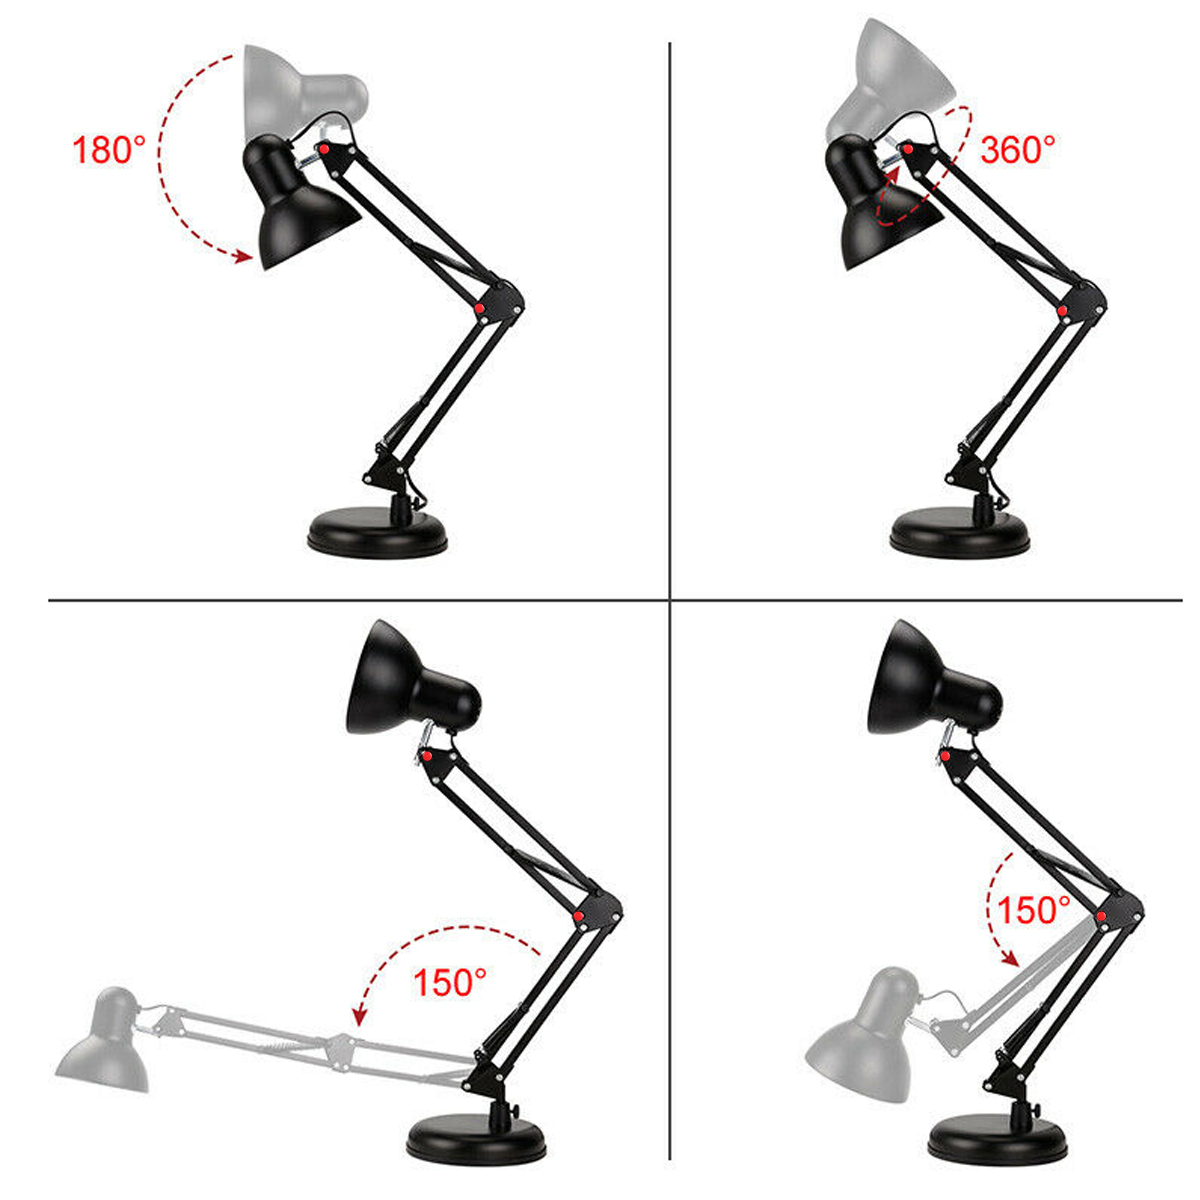 5W-Super-Bright-Swing-Arm-Desk-Lamp-Clamp-on-Table-Light-with-LED-Bulb-Metal-Clip-220V-1742397-6